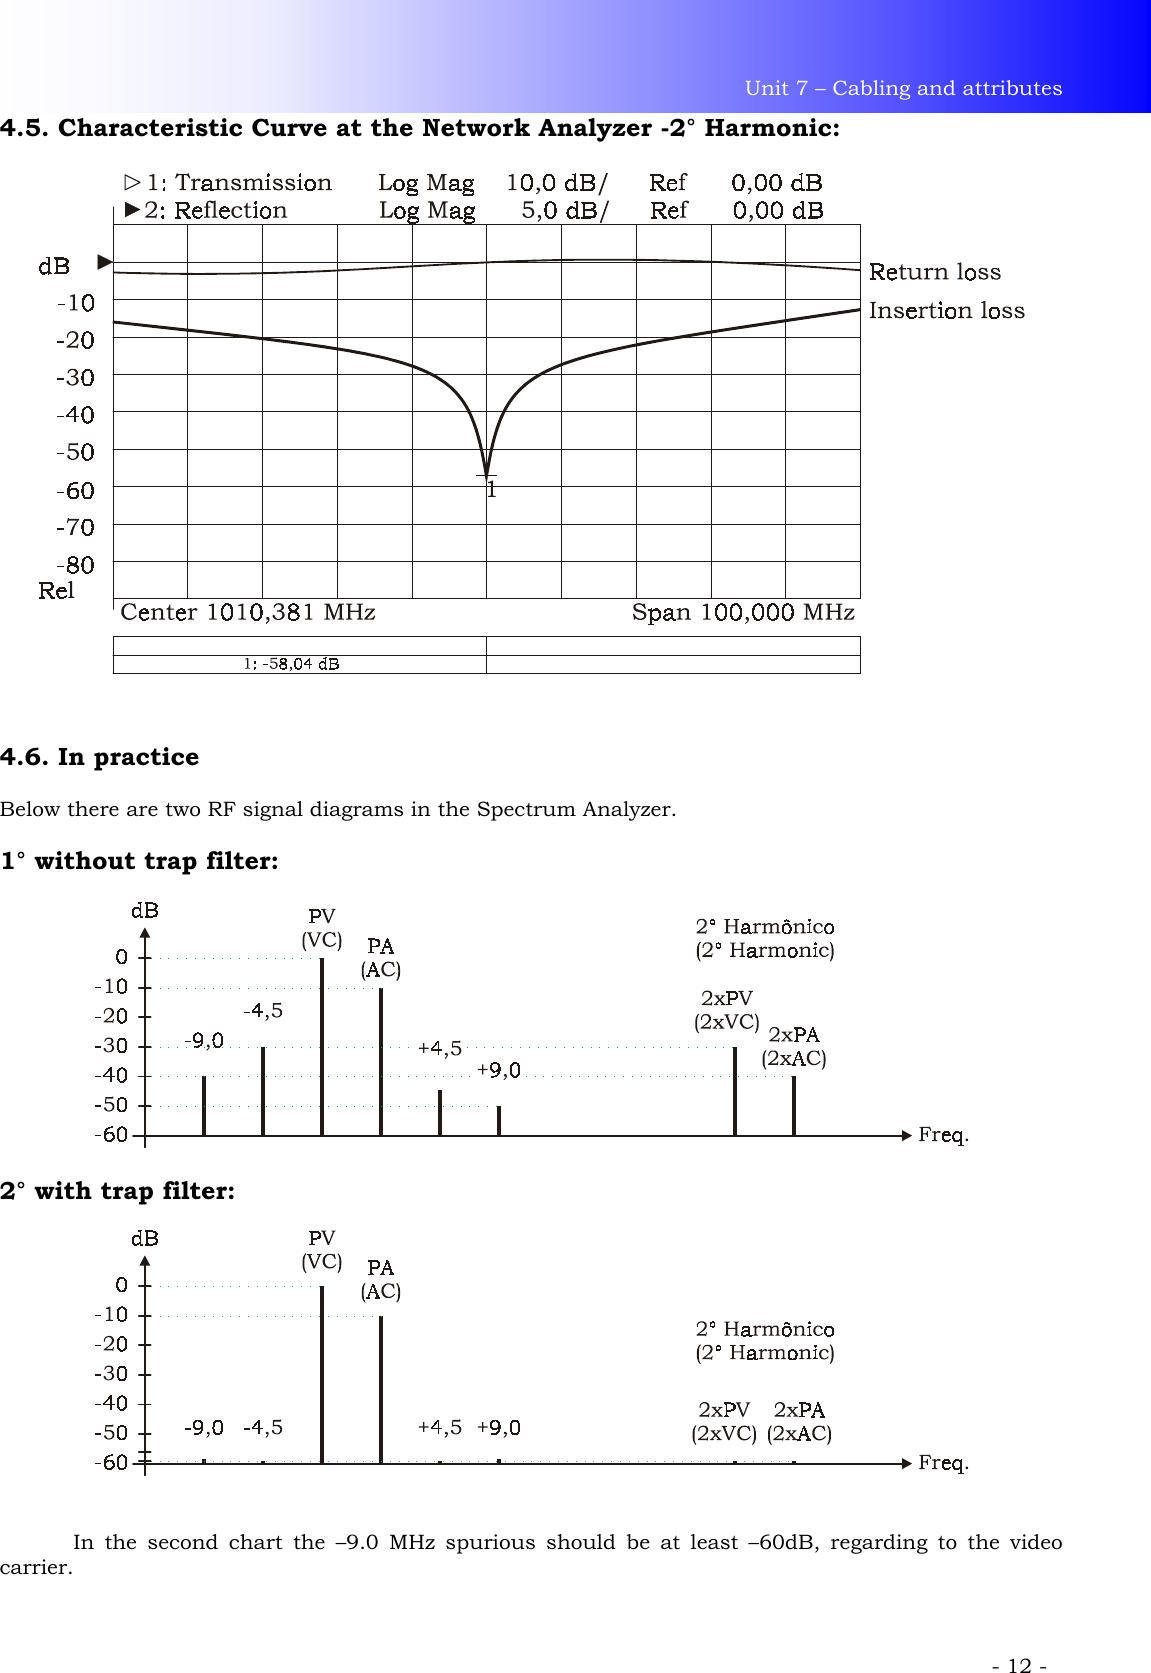 Unit 7 – Cabling and attributes             - 12 - 4.5. Characteristic Curve at the Network Analyzer -2° Harmonic:                          4.6. In practice  Below there are two RF signal diagrams in the Spectrum Analyzer.  1° without trap filter:             2° with trap filter:              In the second chart the –9.0 MHz spurious should be at least –60dB, regarding to the video carrier.  